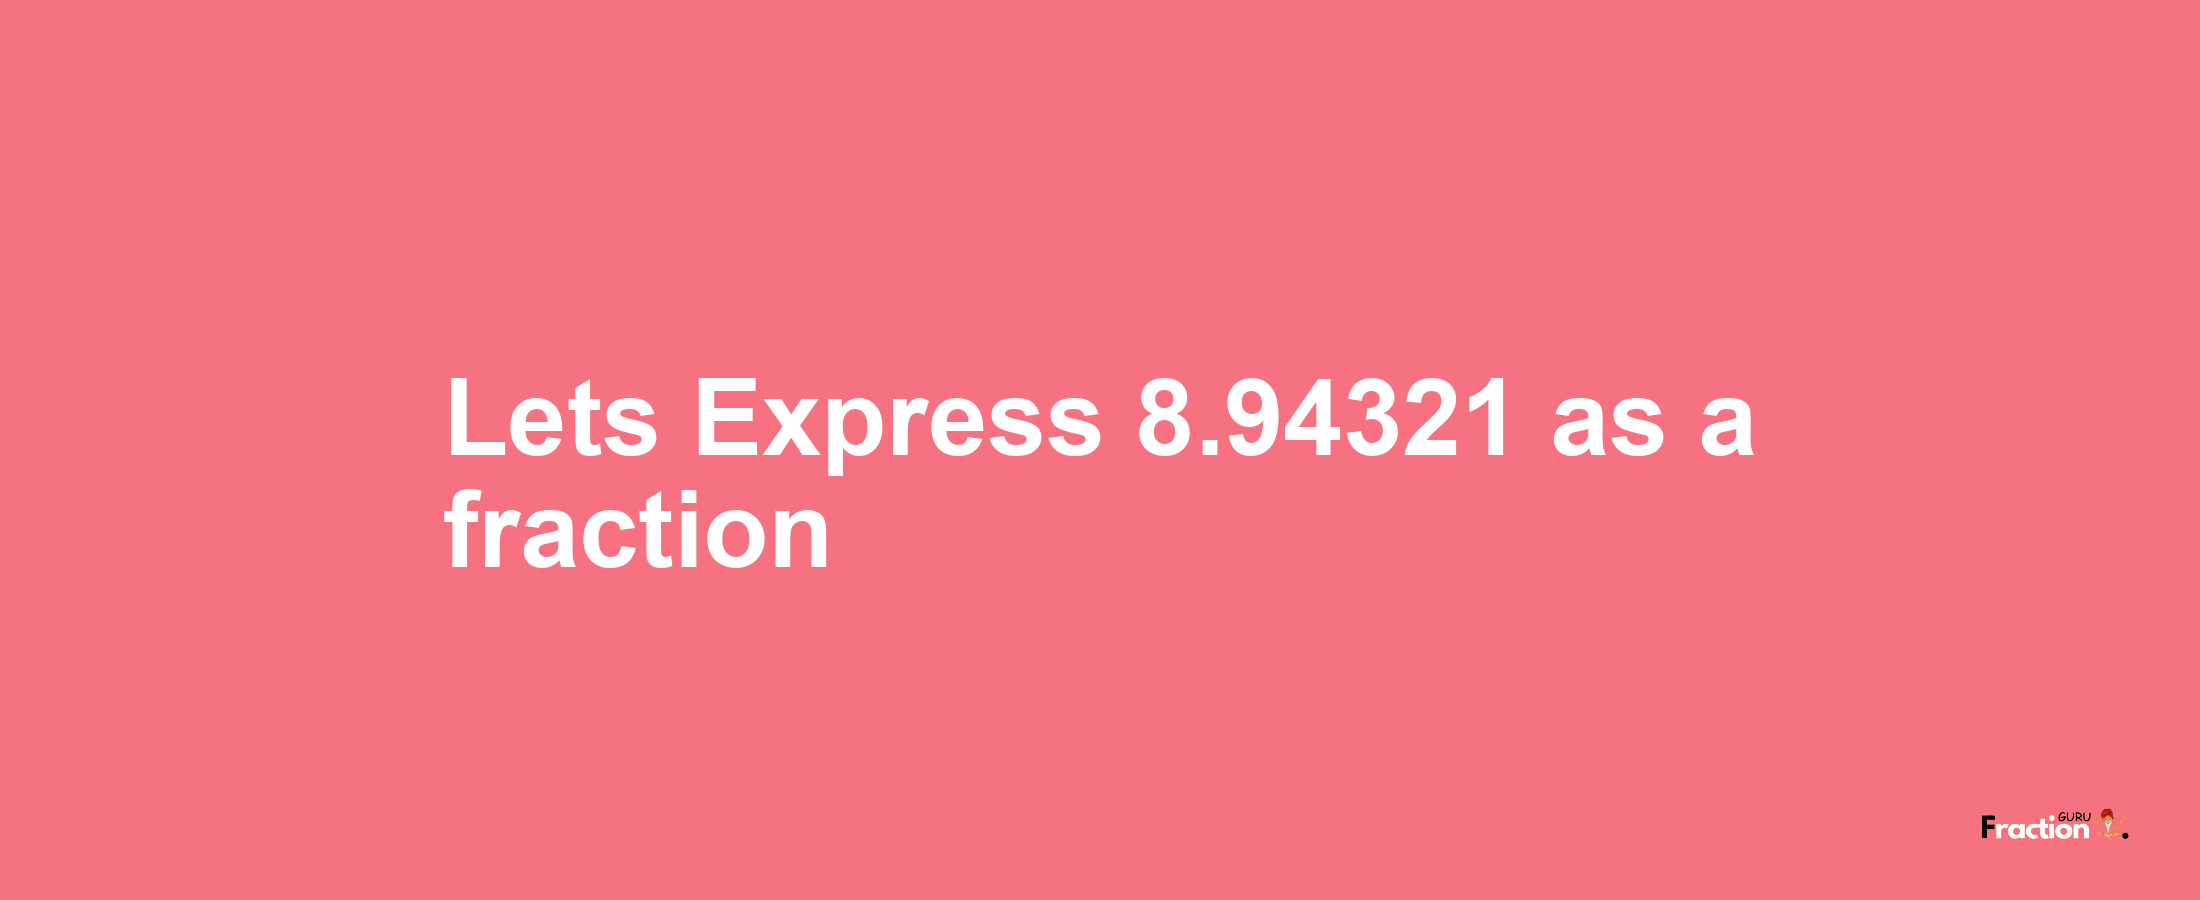 Lets Express 8.94321 as afraction